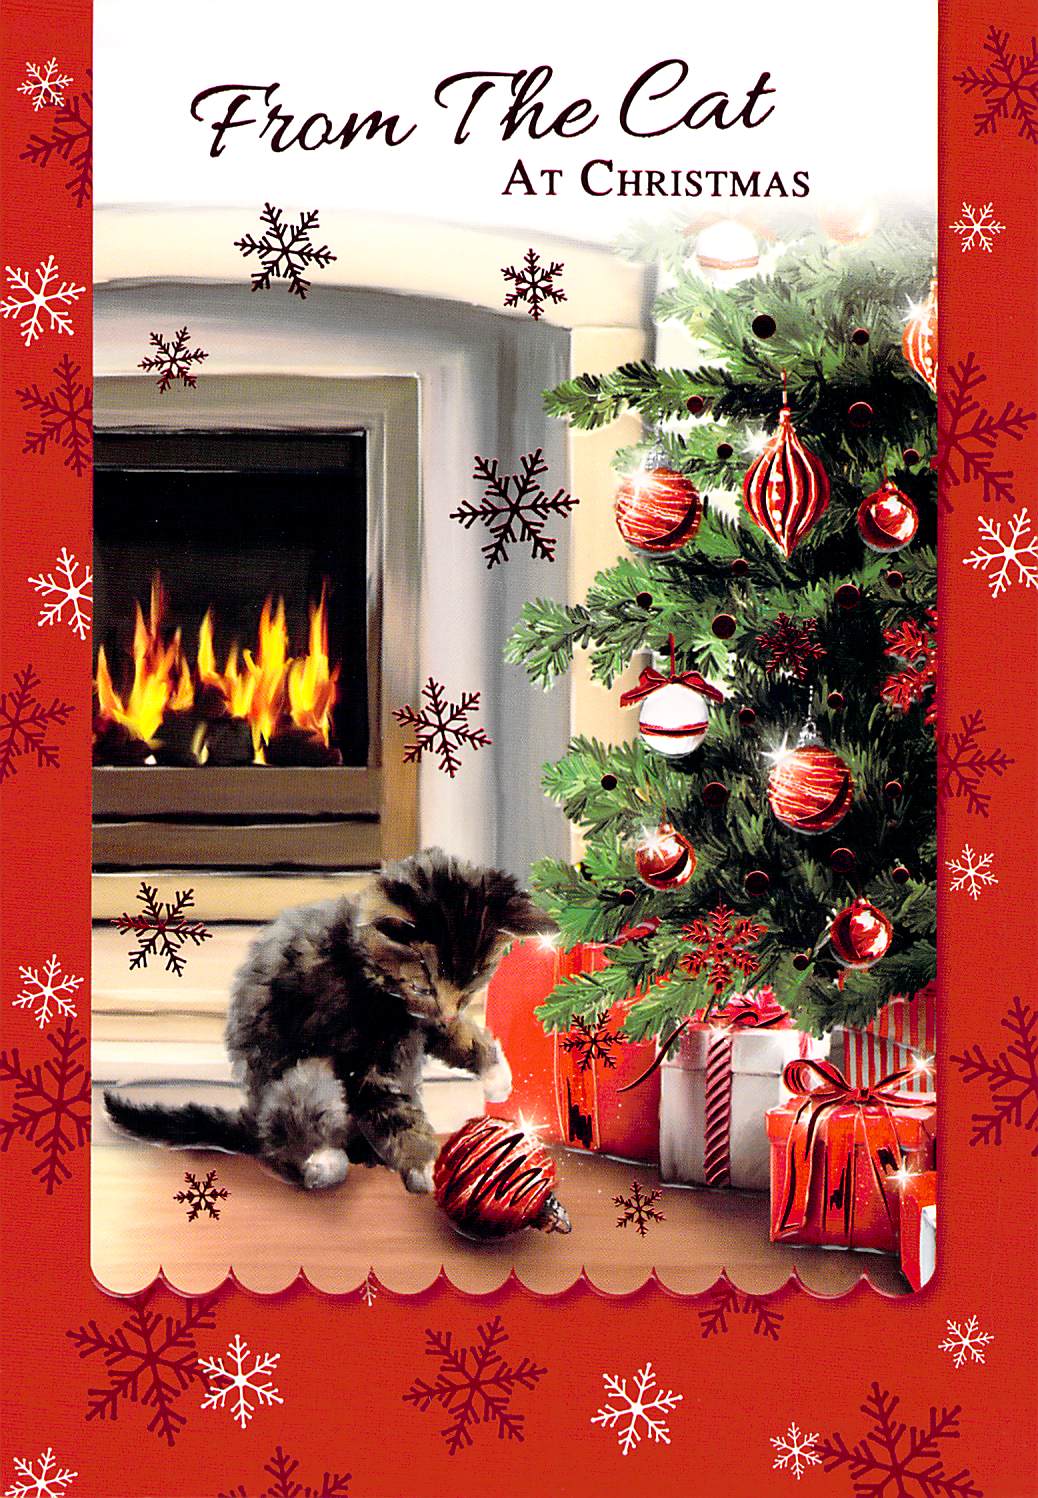 Christmas - From The Cat - Playing- Greeting Card  - Multi Buy Discount